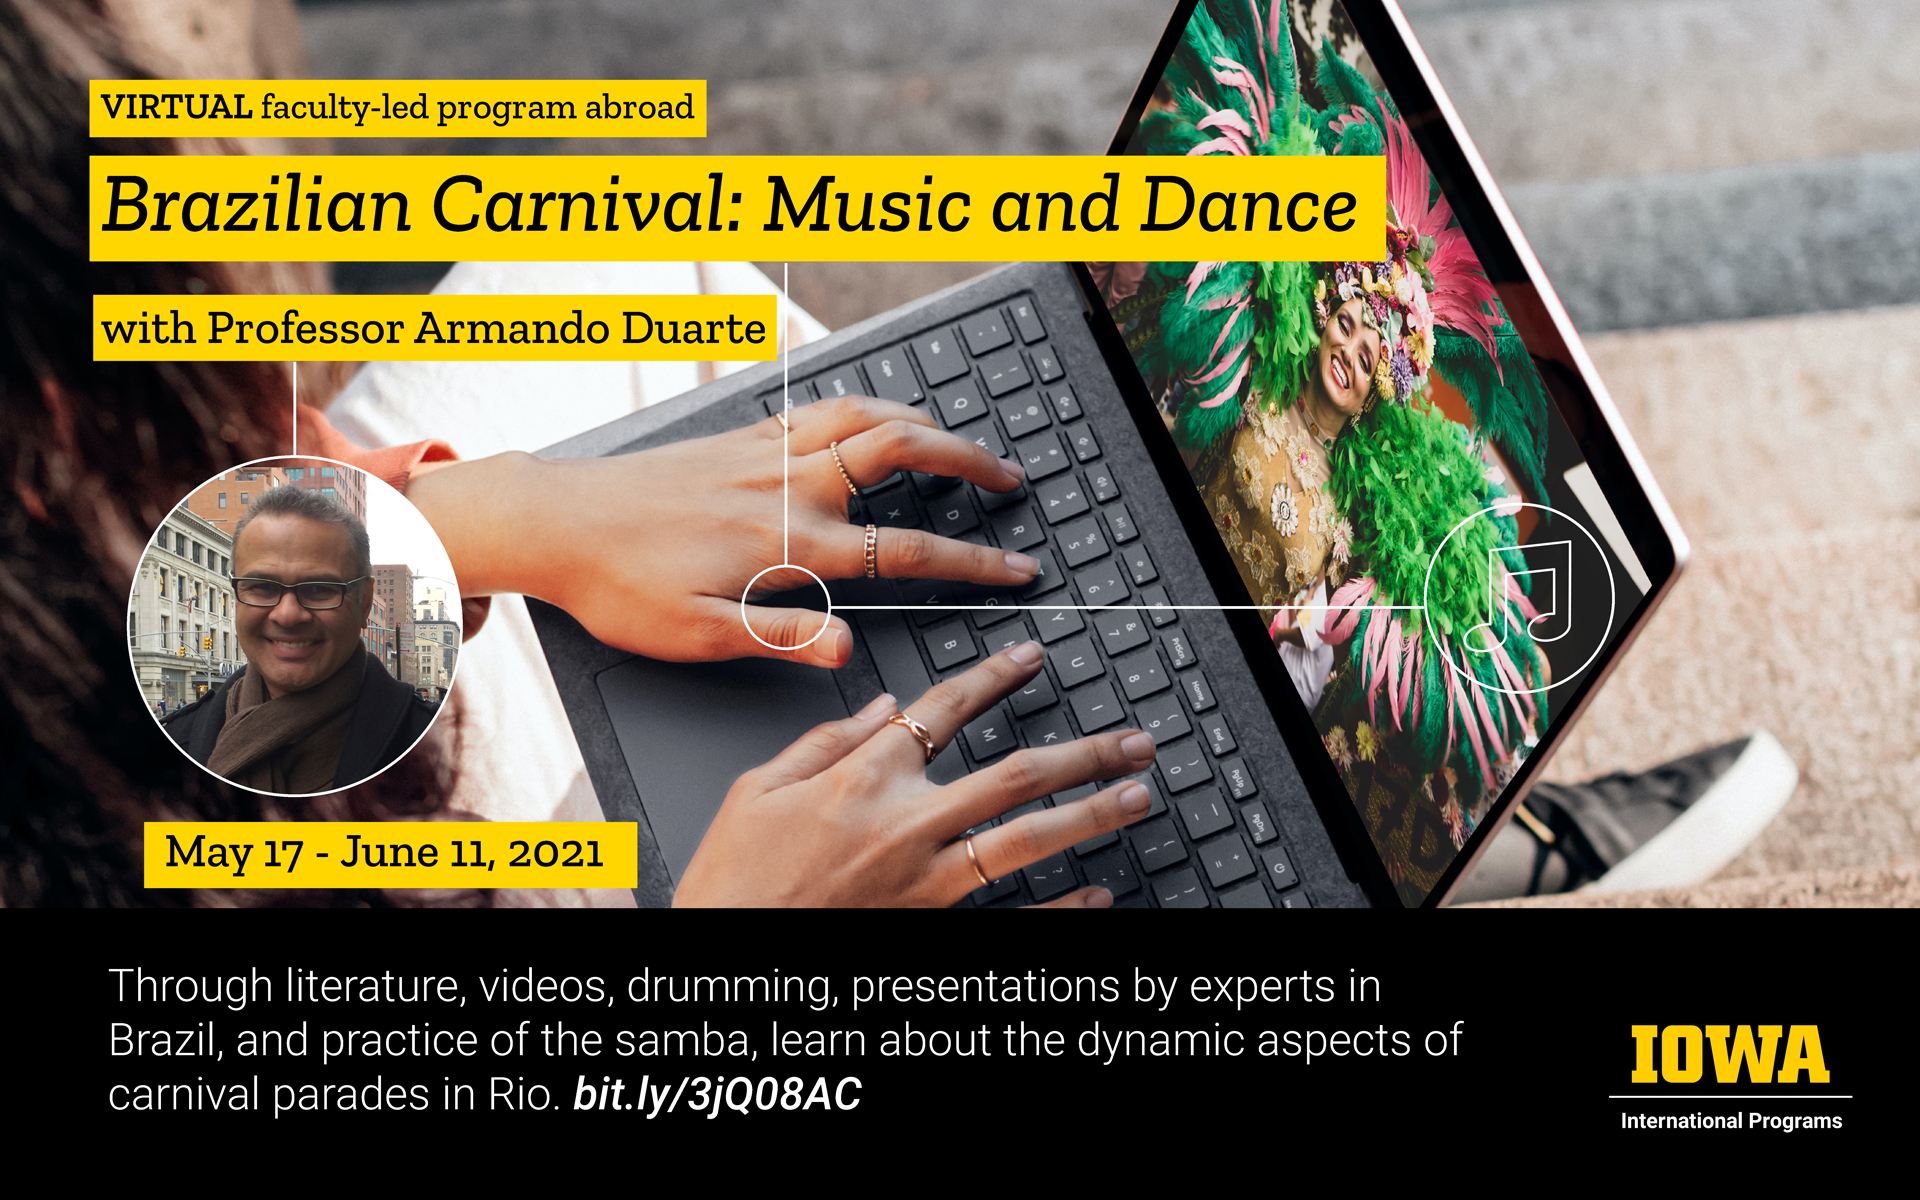 Virtual faculty-led program abroad Brazilian Carnival: Music and Dance with Professor Armando Duarte happening May 17 through June 11, 2021. Through literature, videos, drumming, presentations by experts in Brazil, and practice of the samba, learn about the dynamic aspects of carnival parades in Rio. bit.ly/3jQ08AC